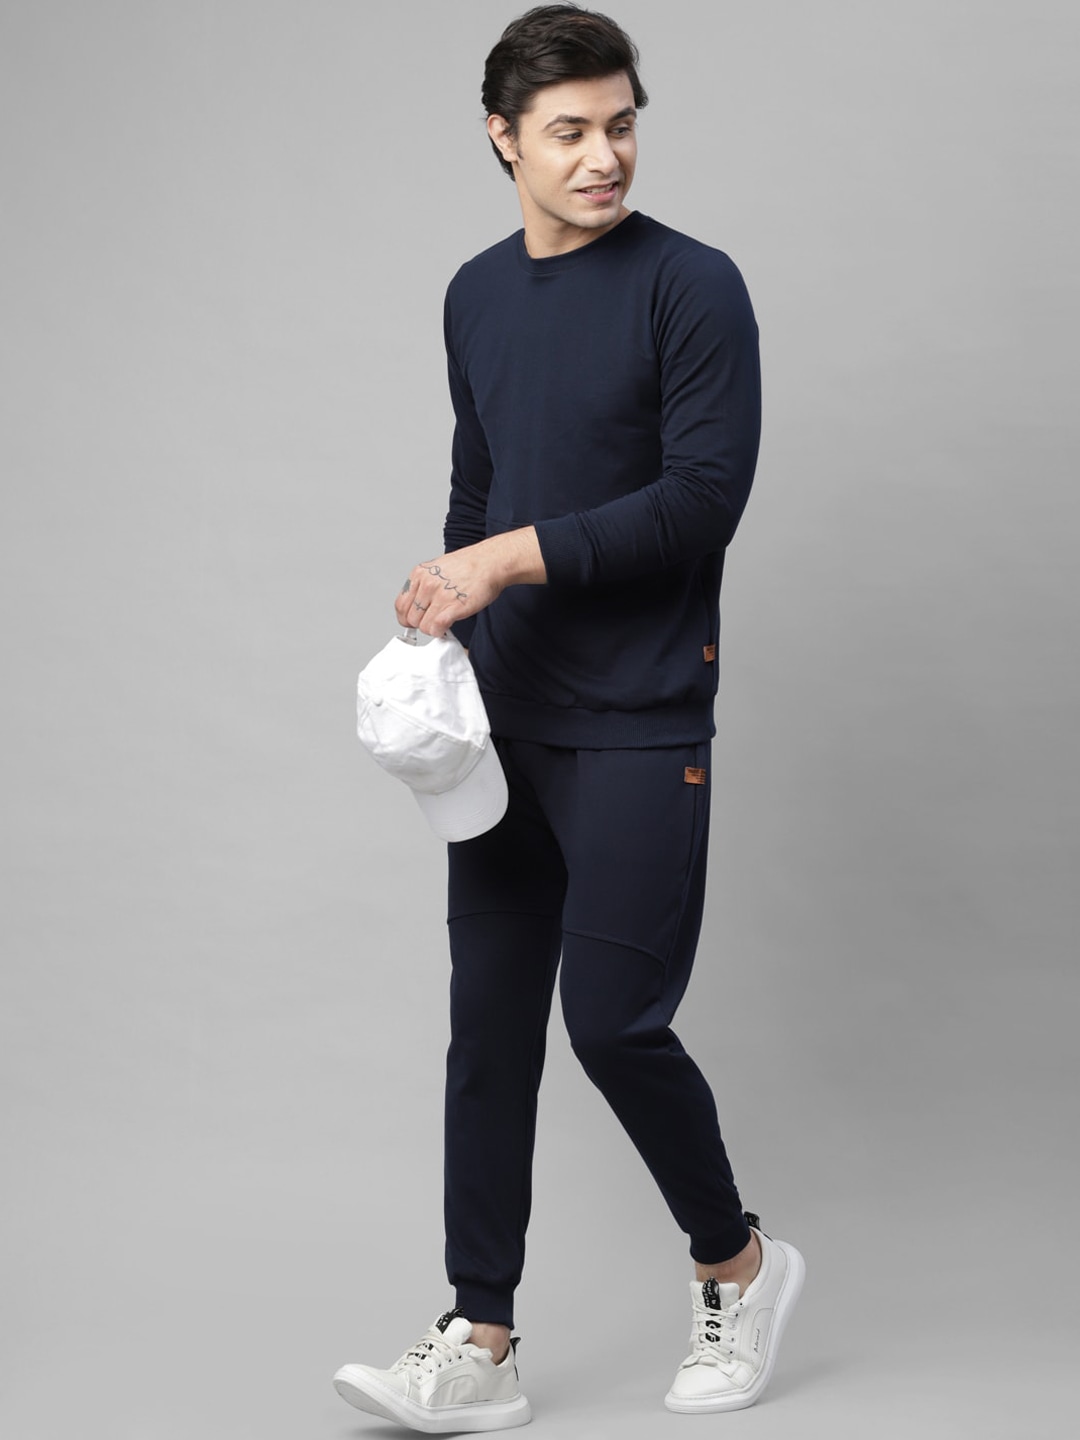 Clothing Tracksuits | Rigo Men Navy Blue Solid Cotton Athleisure Tracksuit - BX57202